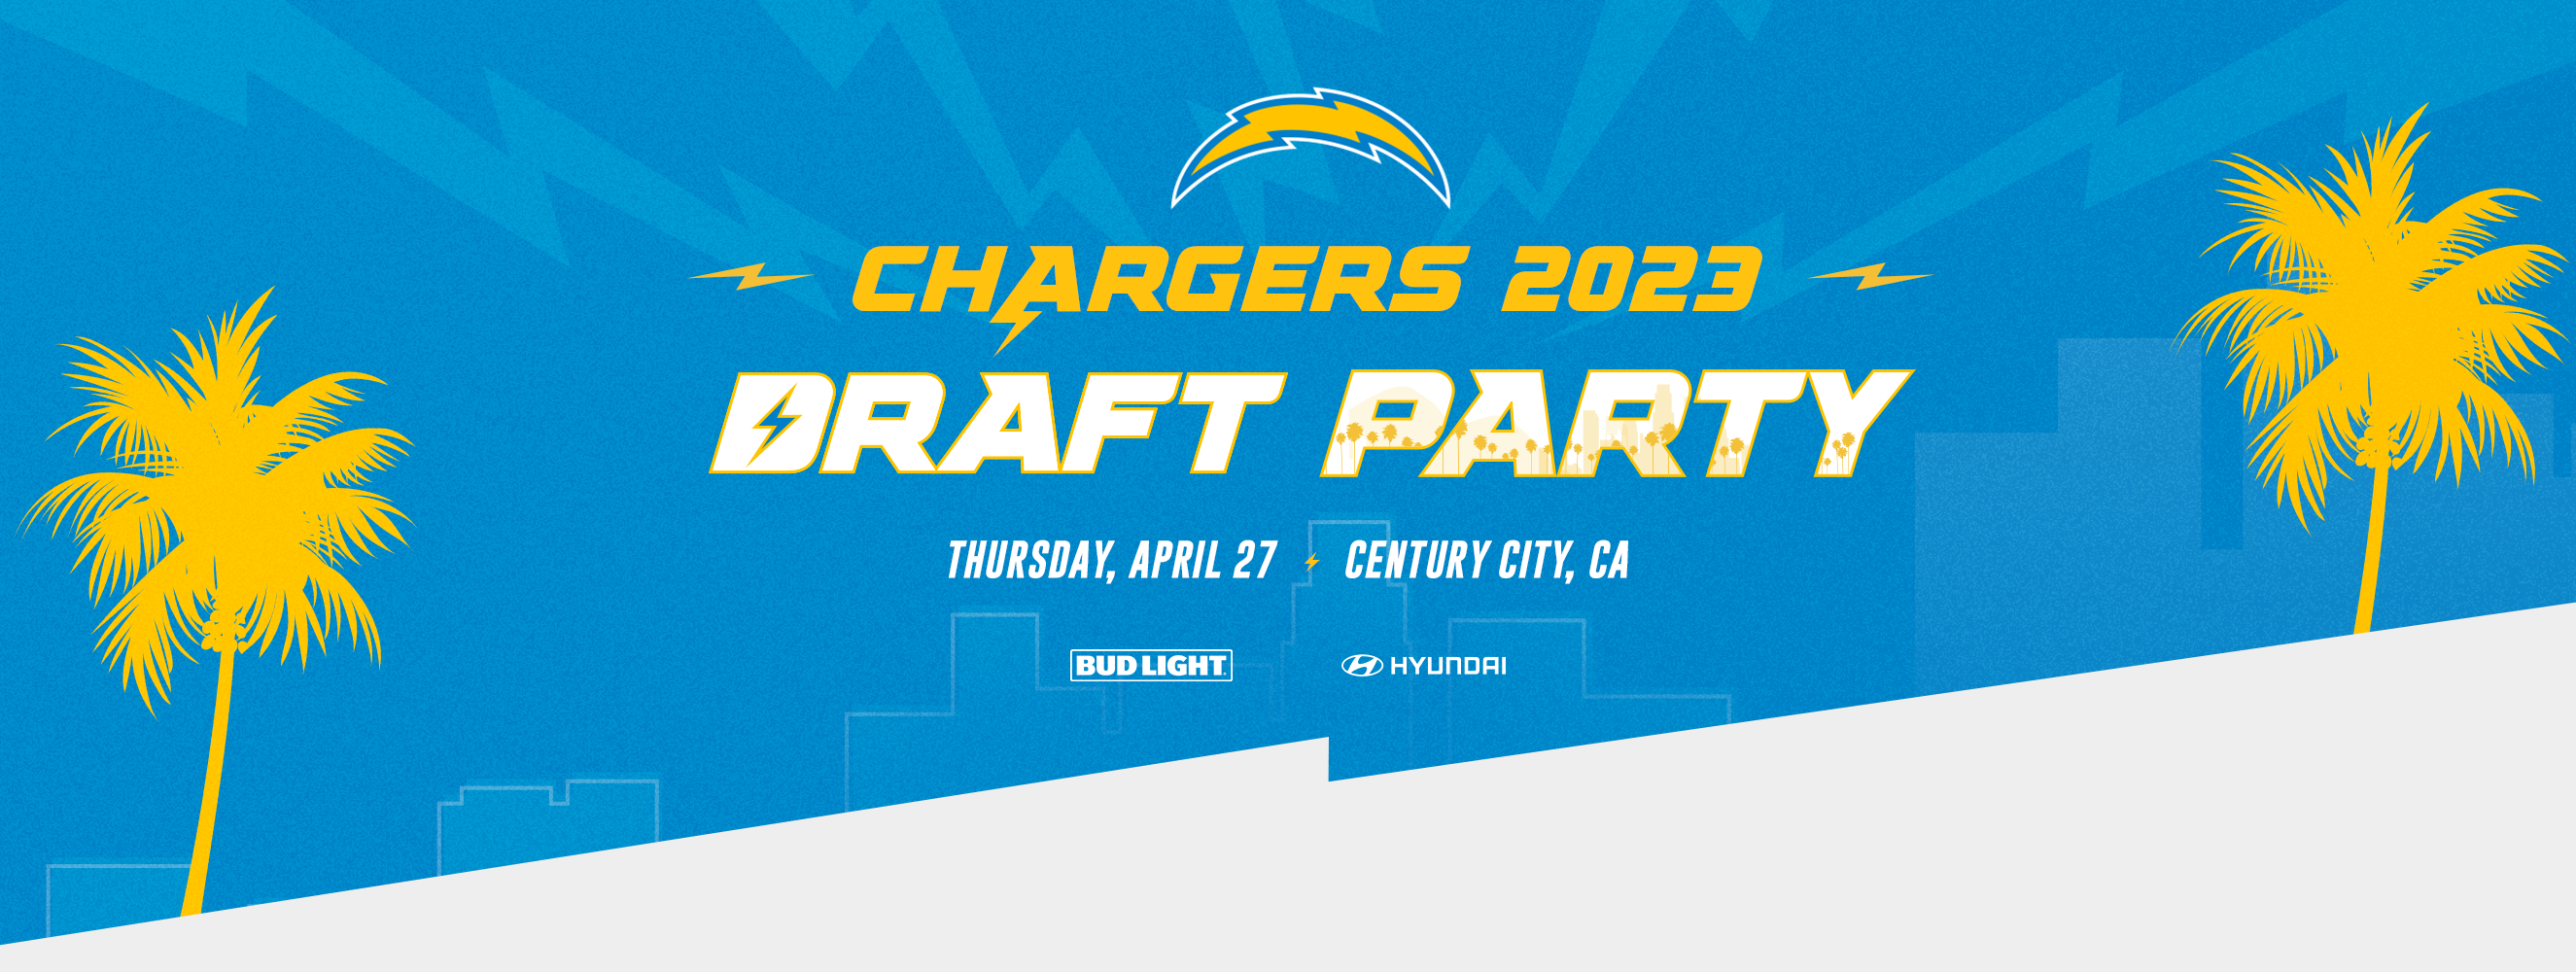 Chargers draft party 2023